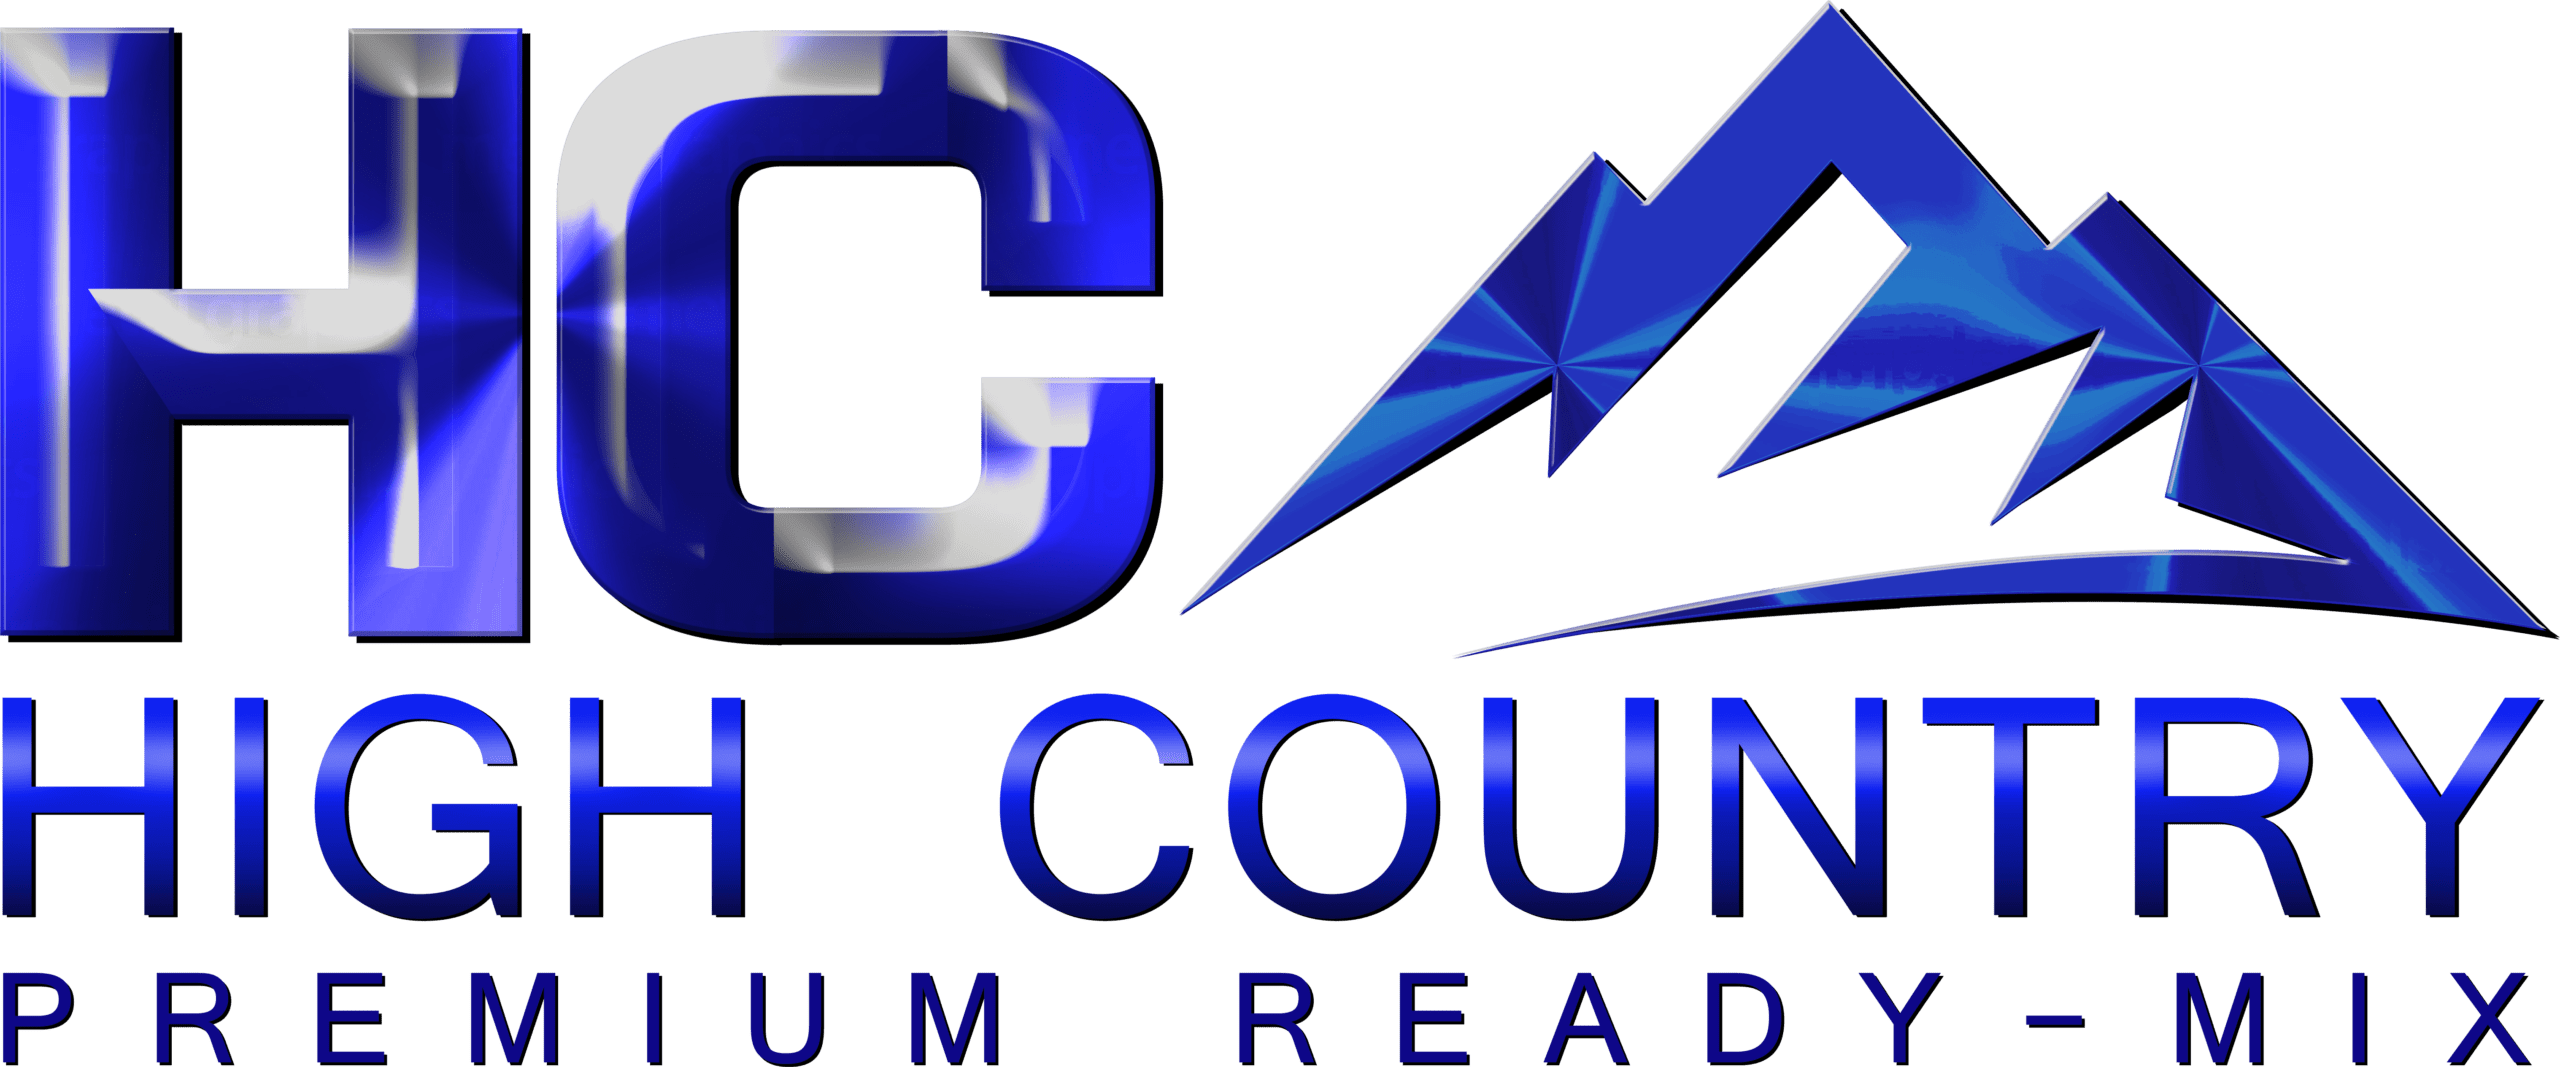 High Country Premium Ready-Mix